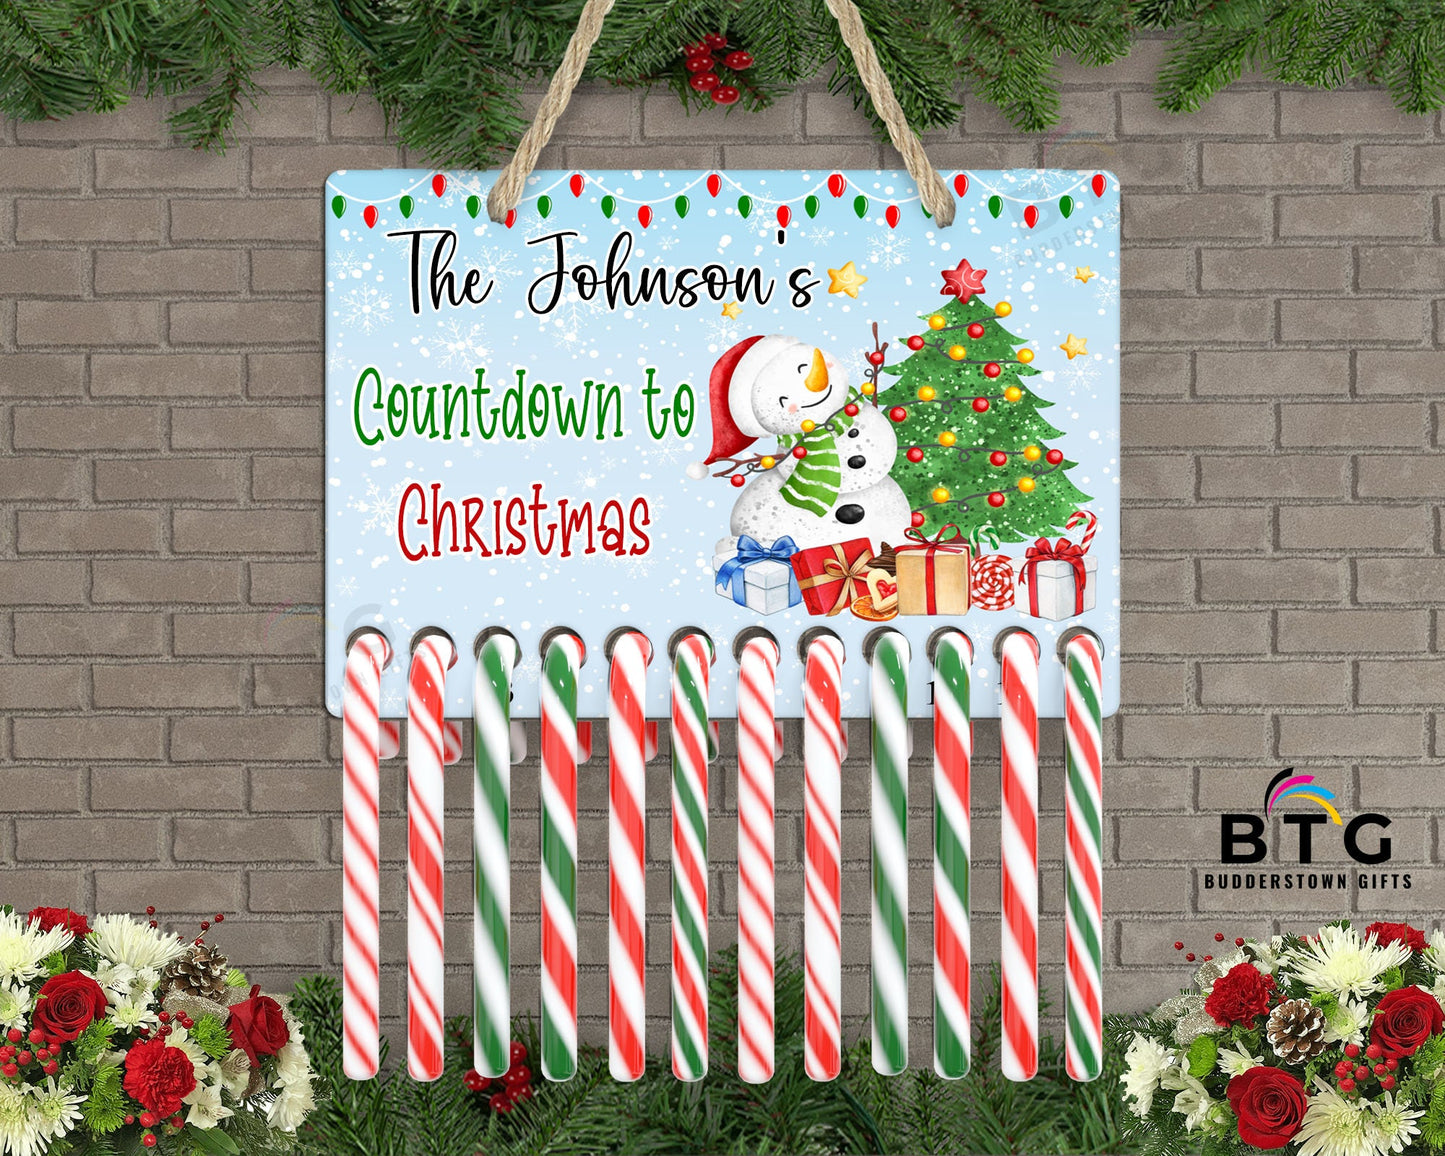 Candy Cane Christmas Countdown - 12 Days to Christmas - Snowman Decor - Kids Interactive